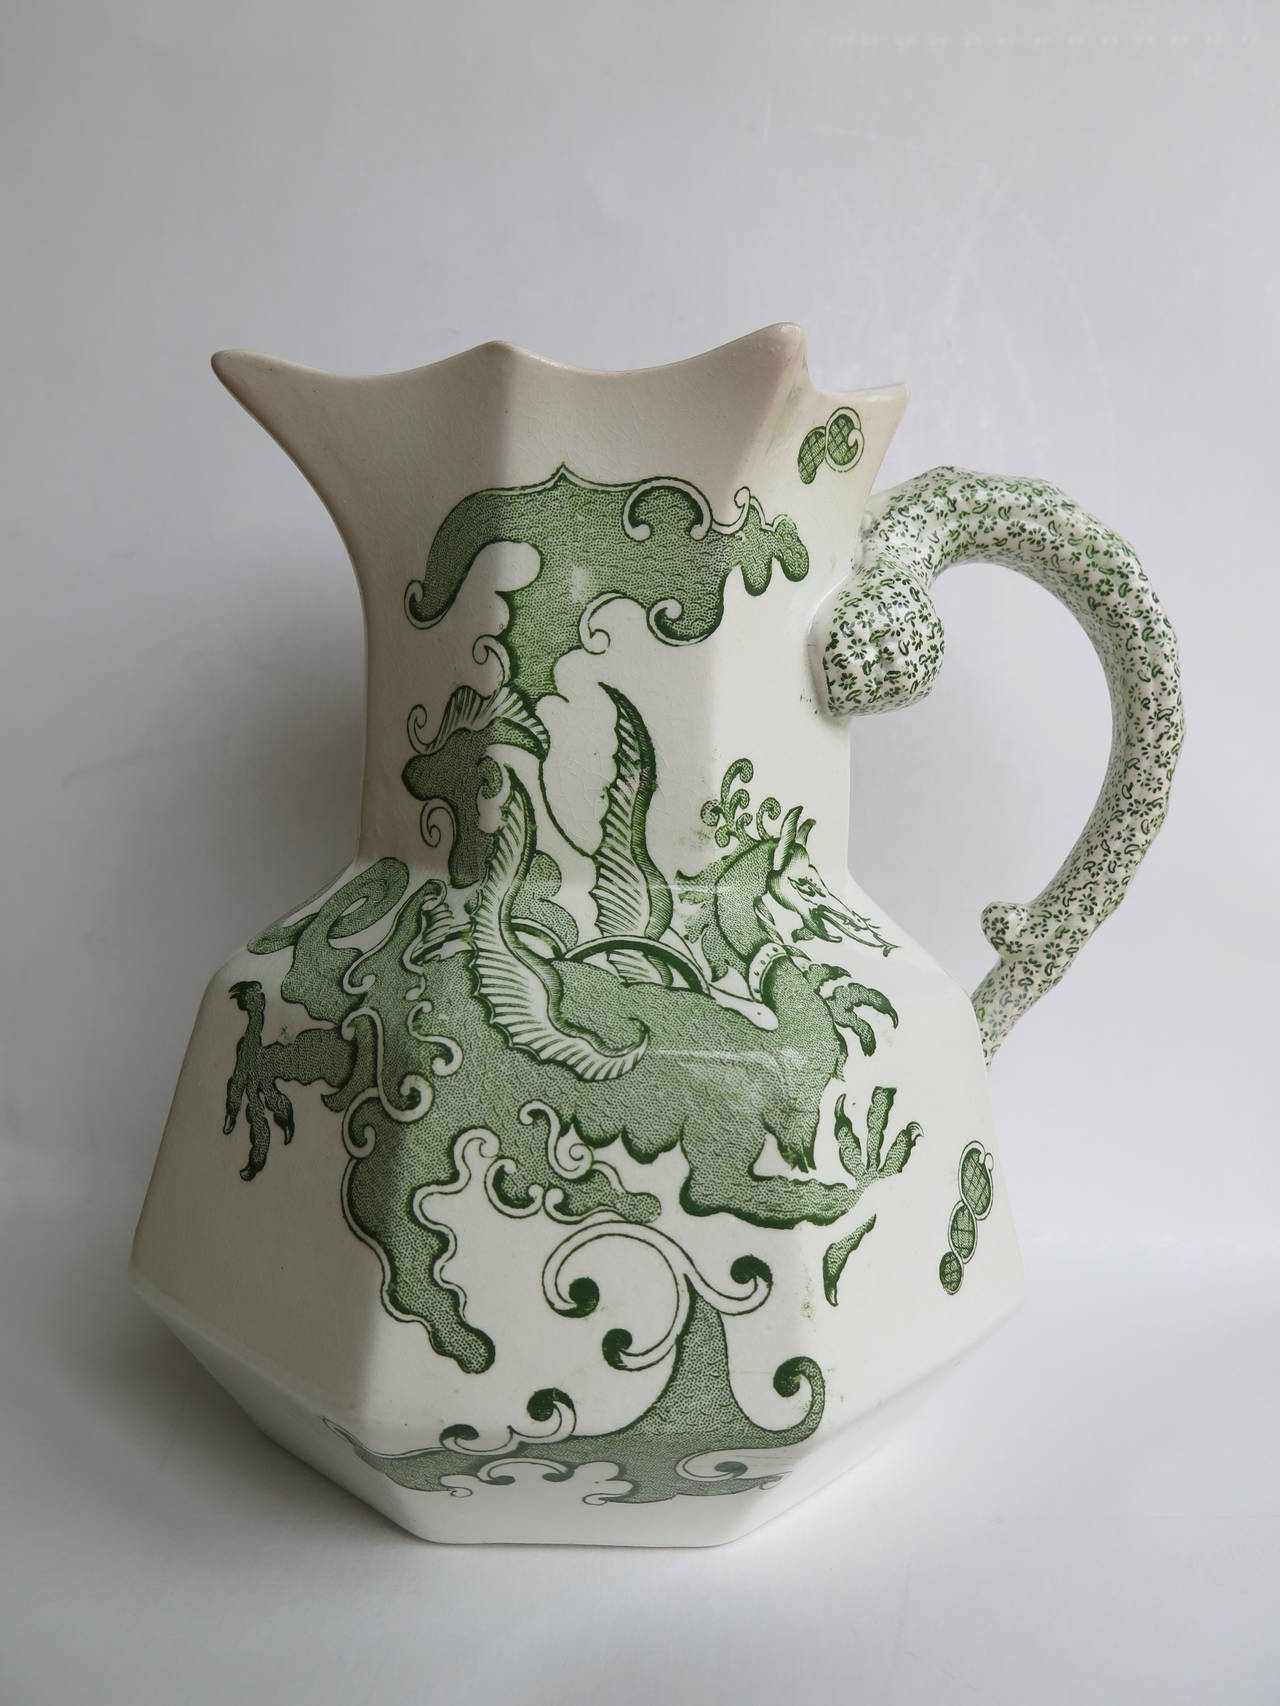 This is a very good Hydra Jug or pitcher by Mason's Ironstone, England. 

The Jug is octagonal in shape with the snake handle. These jugs were made in a range of sizes, varying from a small of under three inches high to large, such as this at over